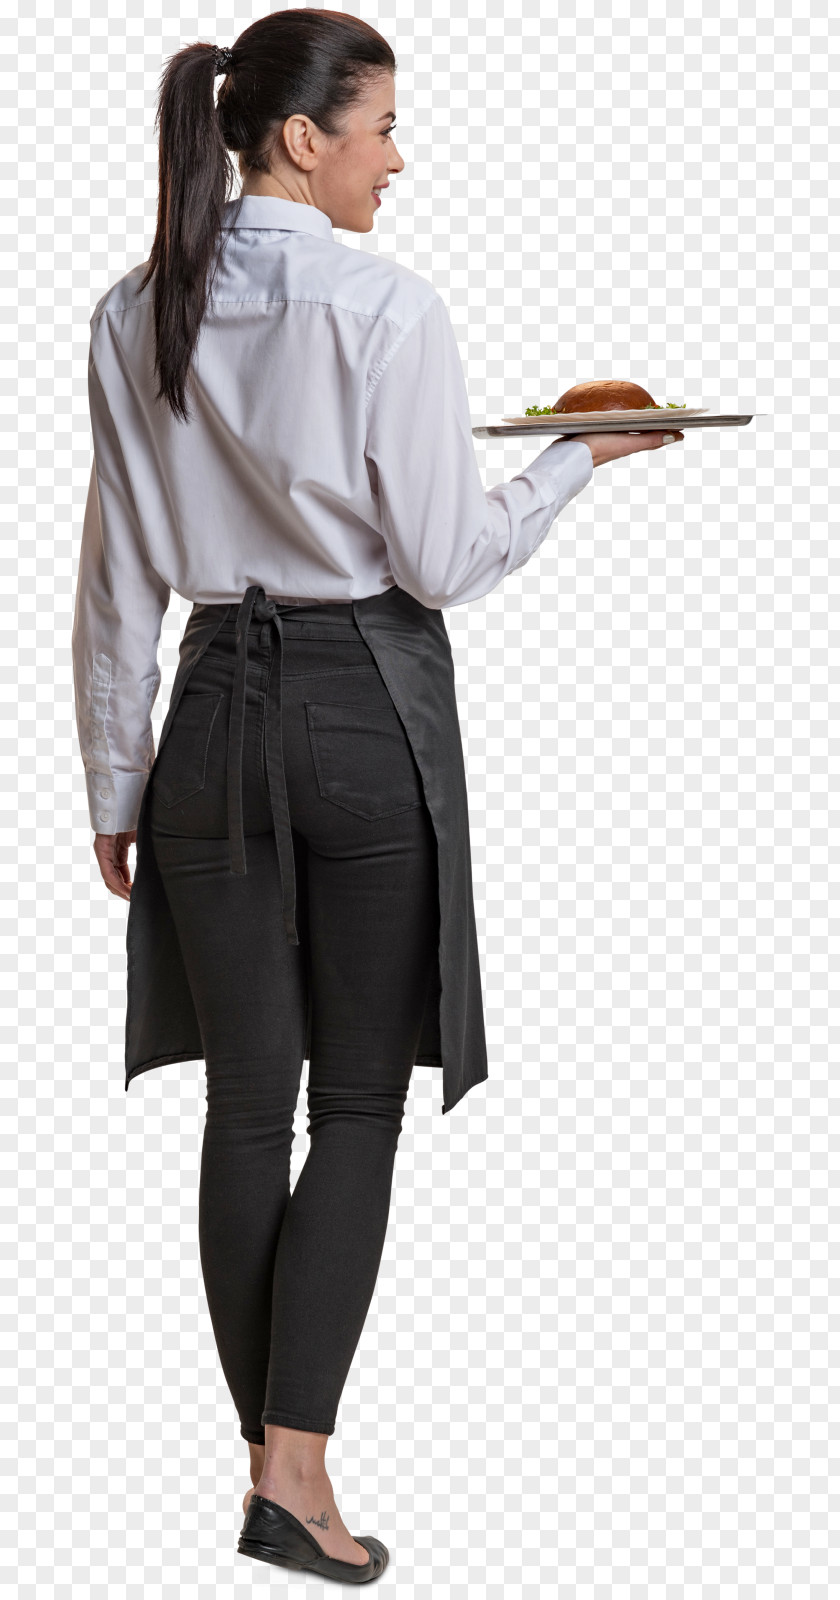 Cut Out People Waiter Profession Cafe Barista Architecture PNG